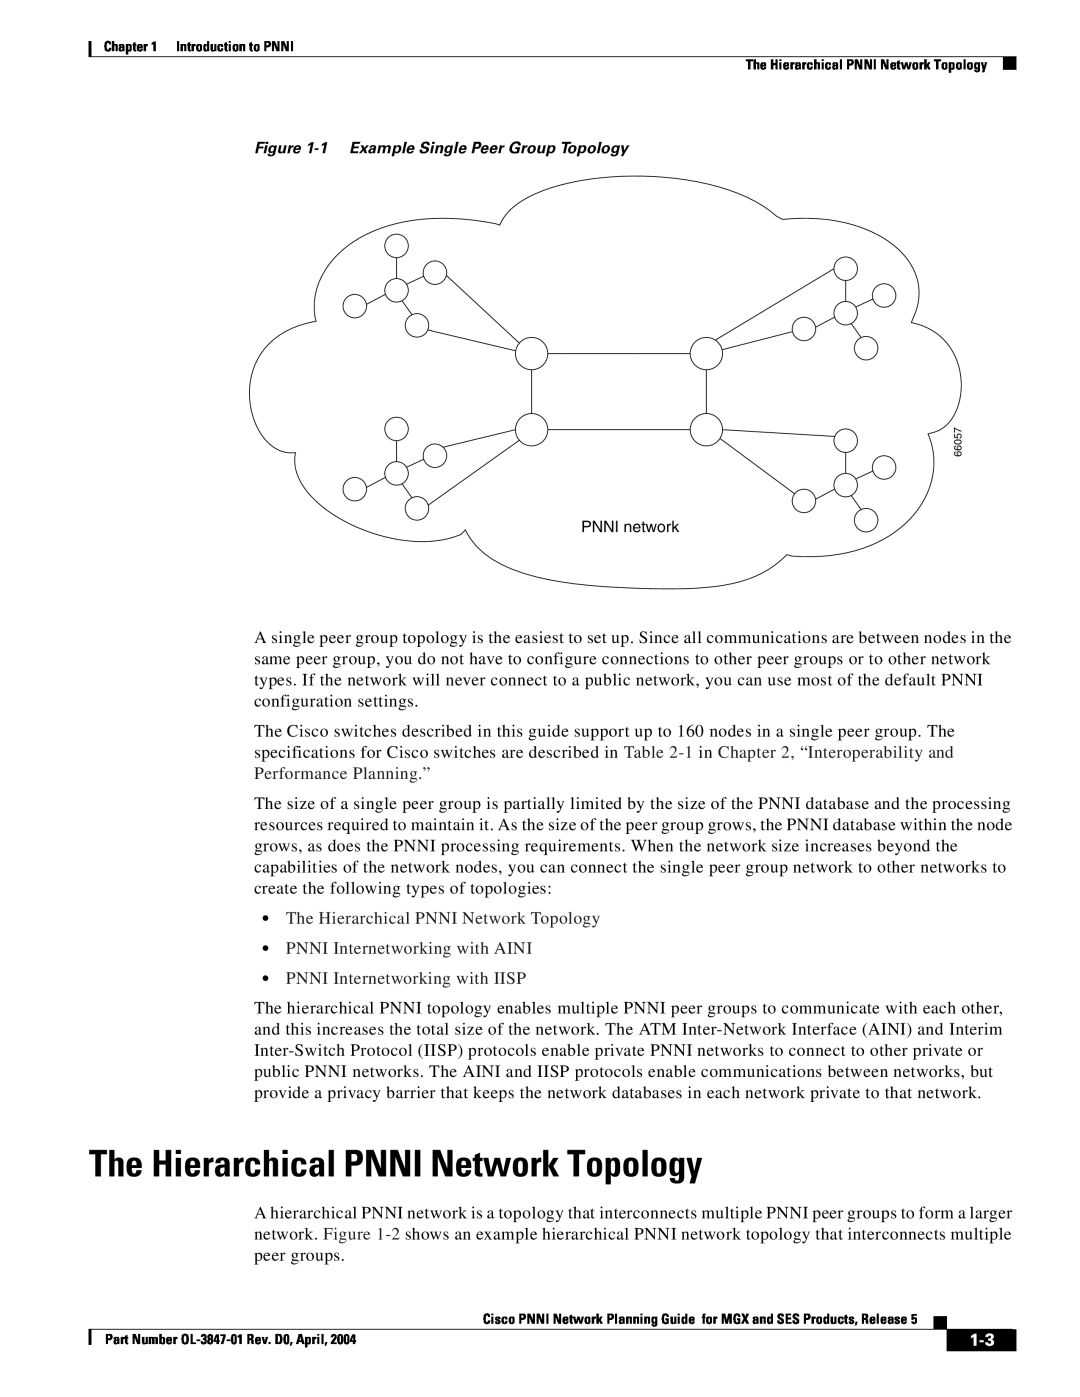 Cisco Systems Network Router manual The Hierarchical PNNI Network Topology, PNNI Internetworking with IISP 